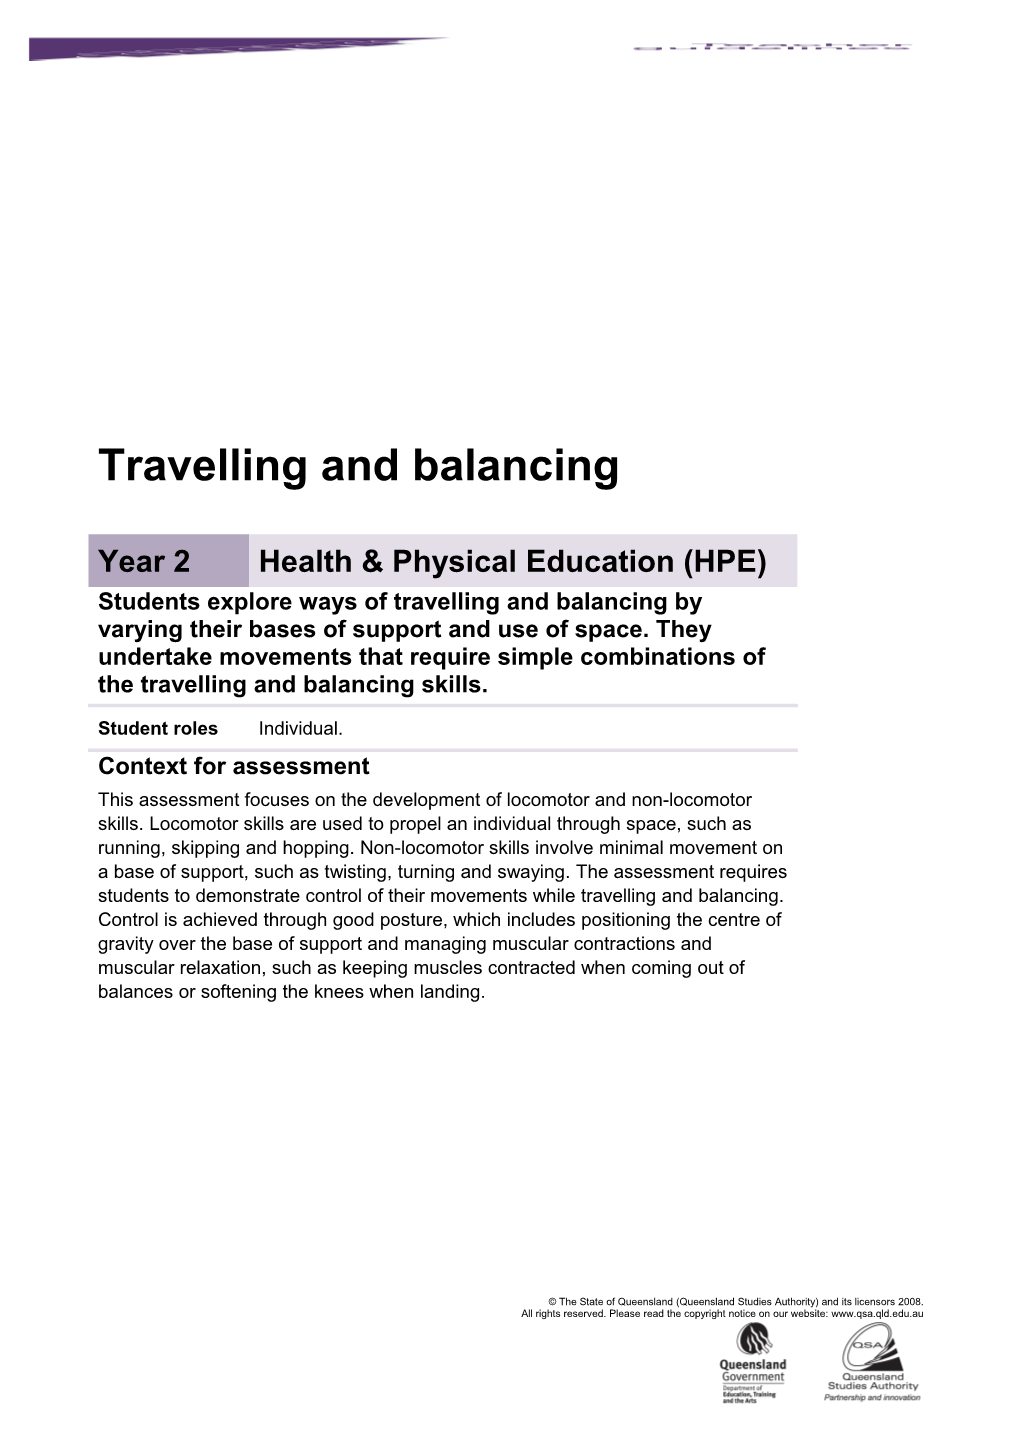 Year 2 Health & Physical Education Assessment Teacher Guidelines Travelling and Balancing